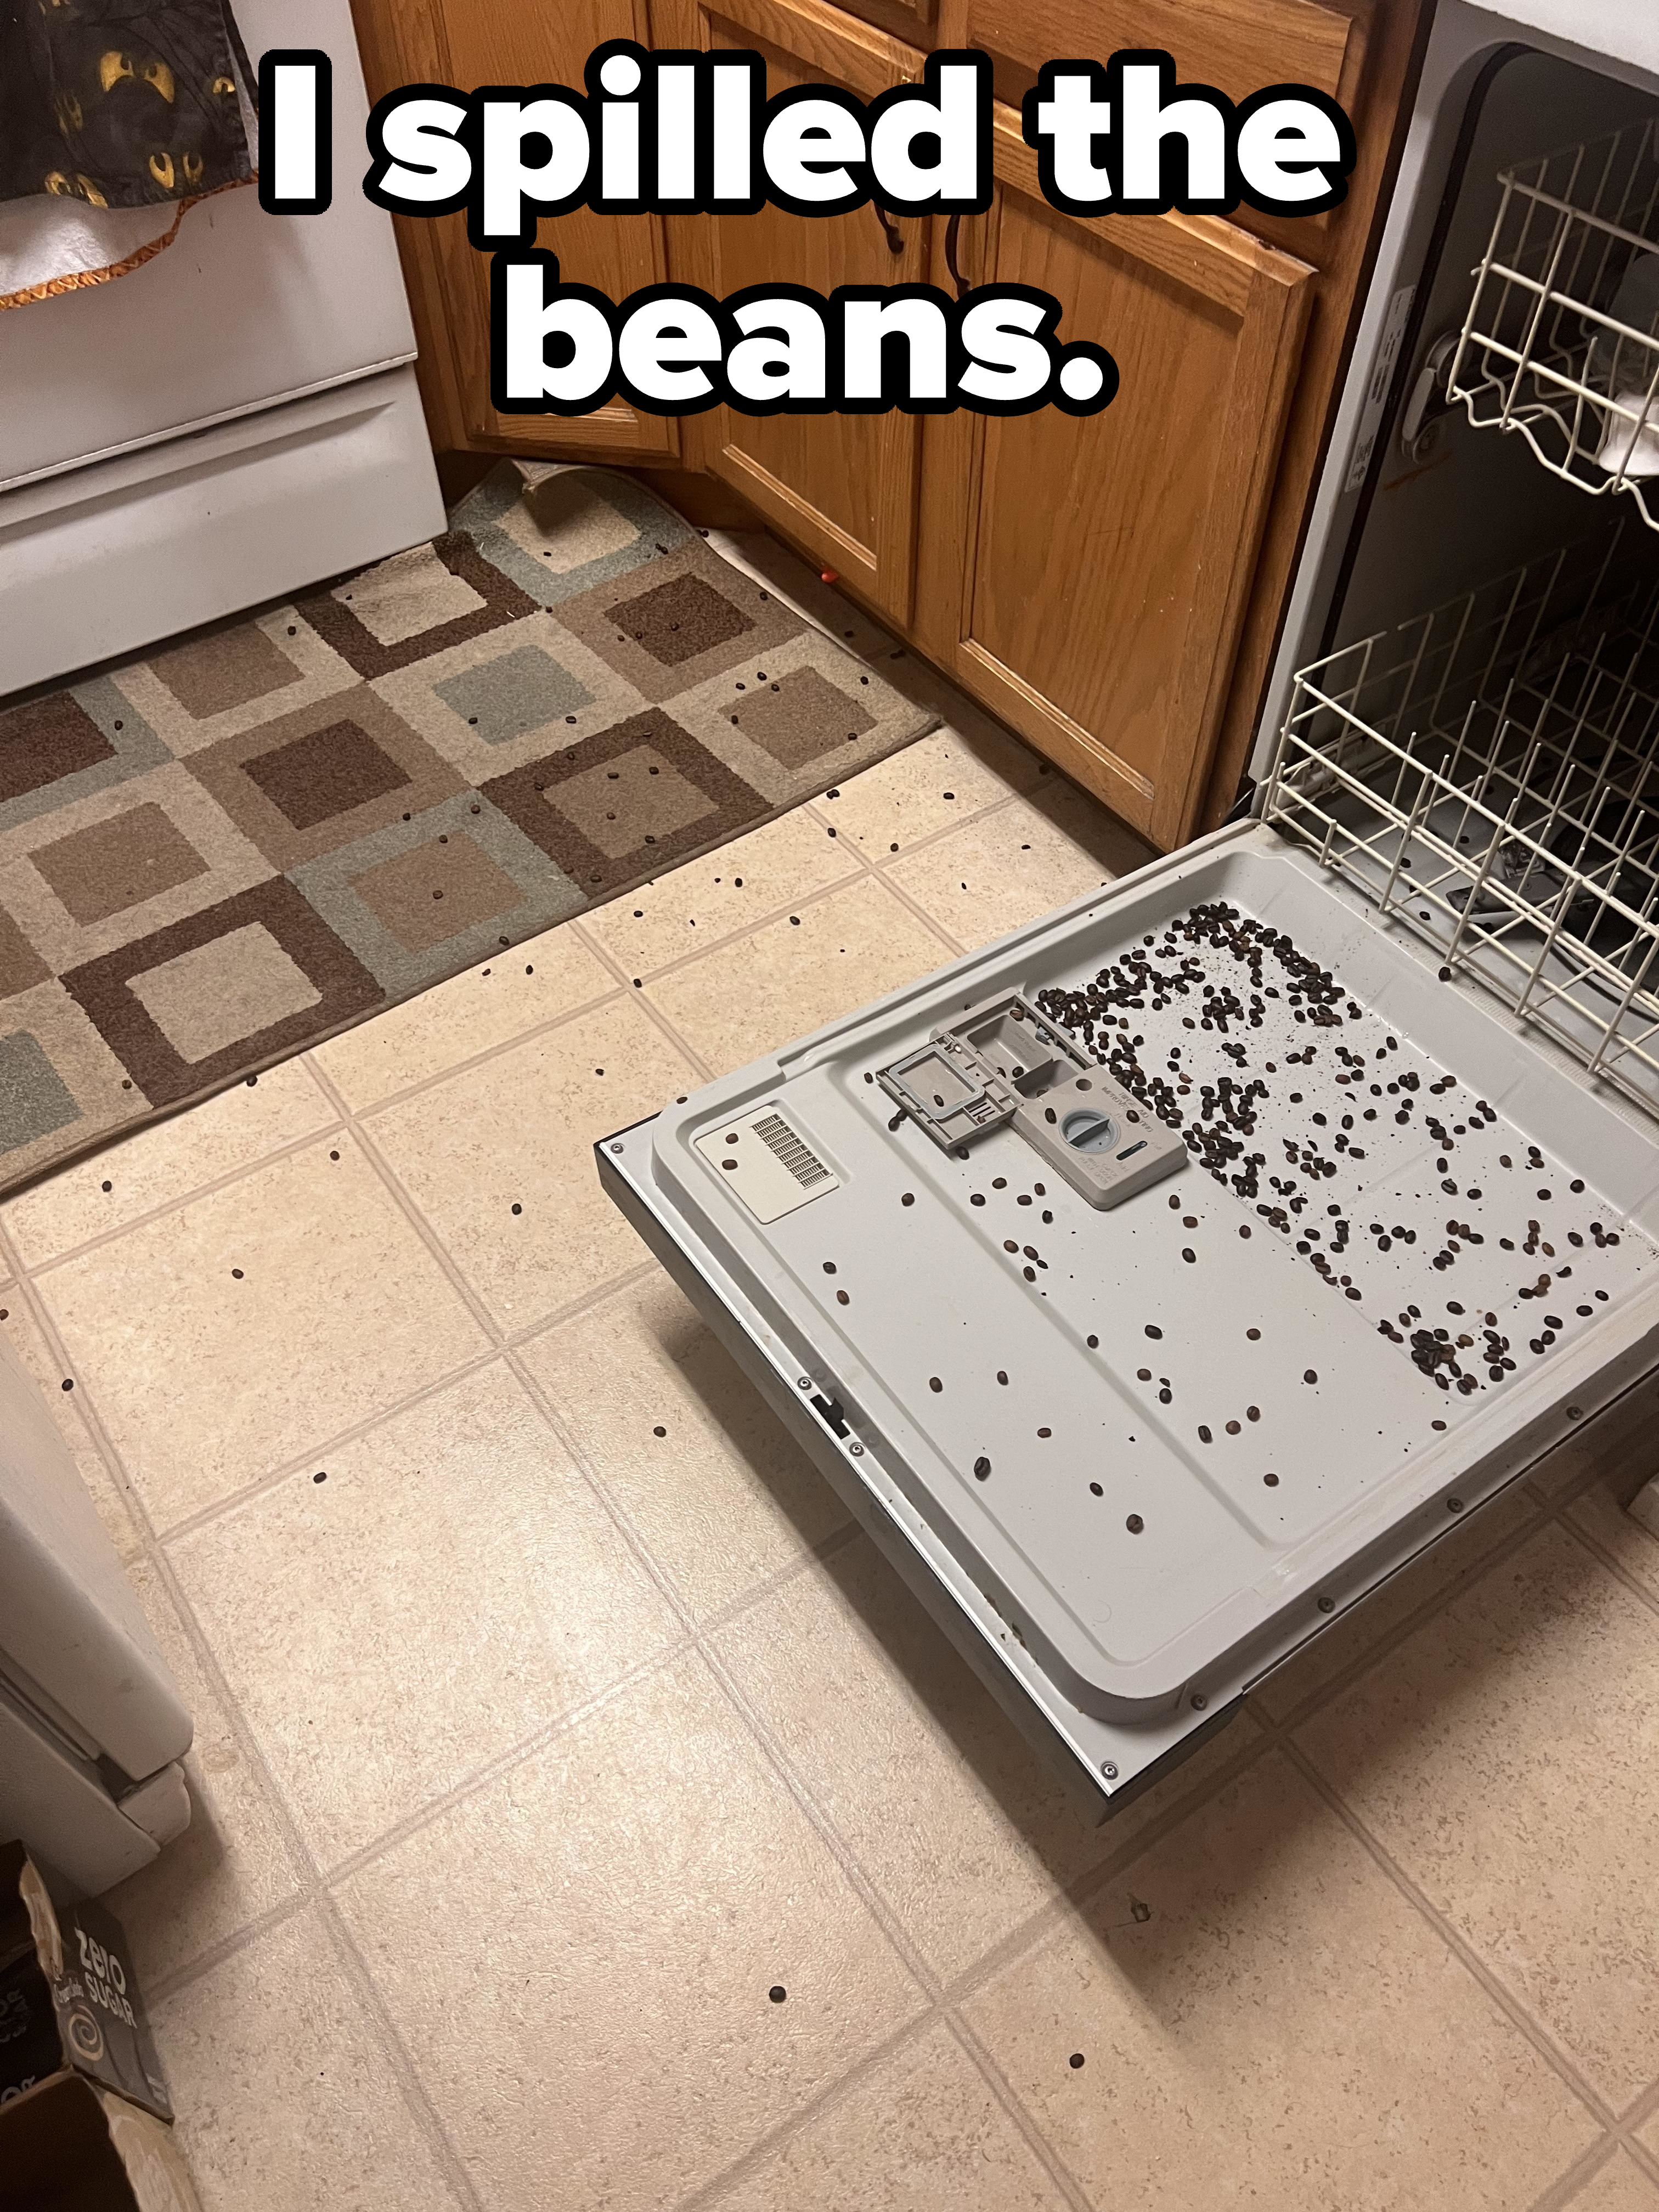 &quot;I spilled the beans,&quot; showing beans spilled all over a kitchen floor and dishwasher